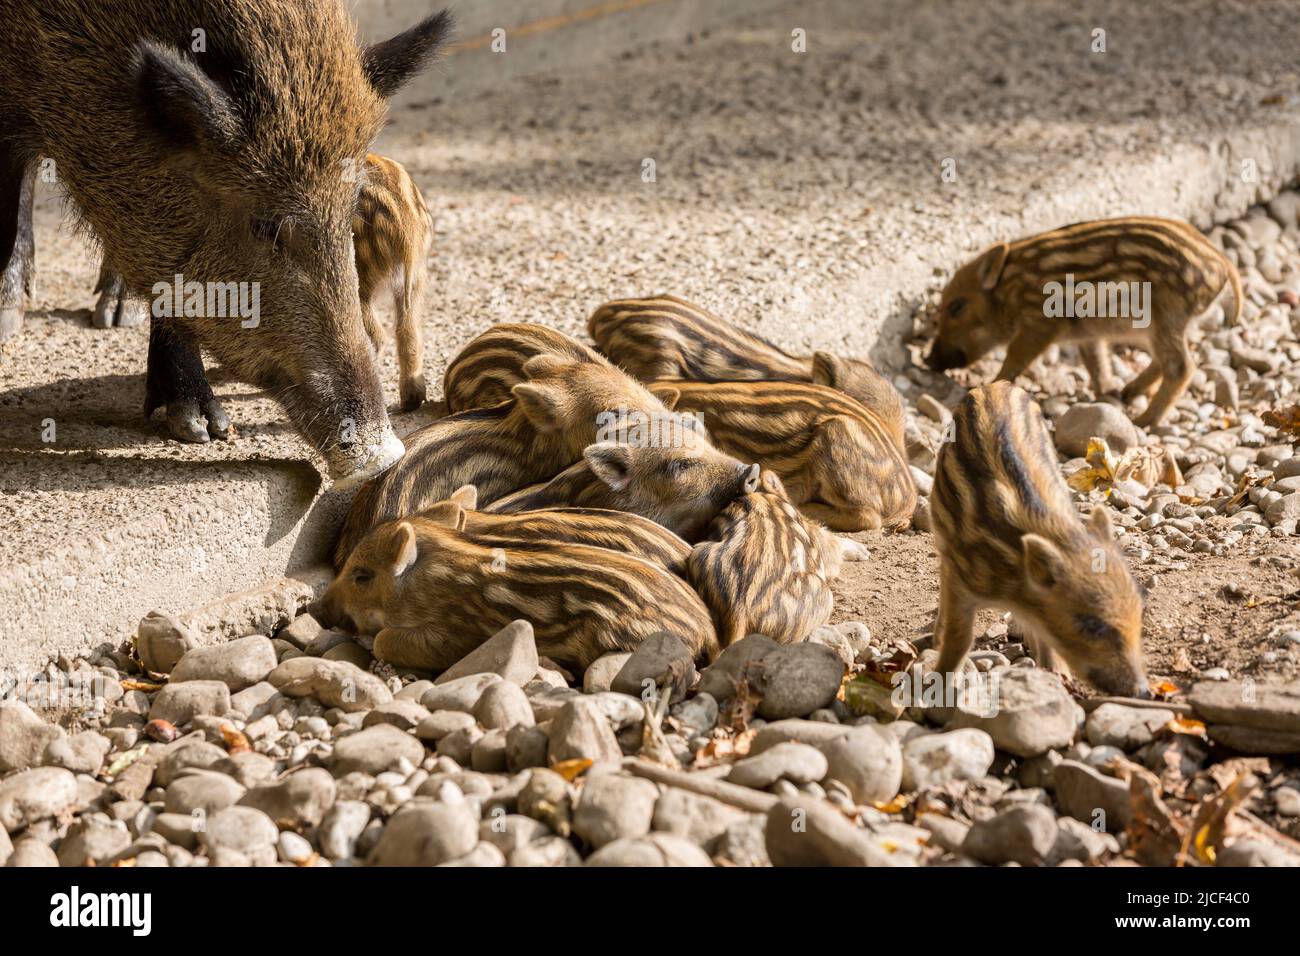 A group of wild boar piglets. Huddled together to keep warm. With mature wild boar. Stock Photo